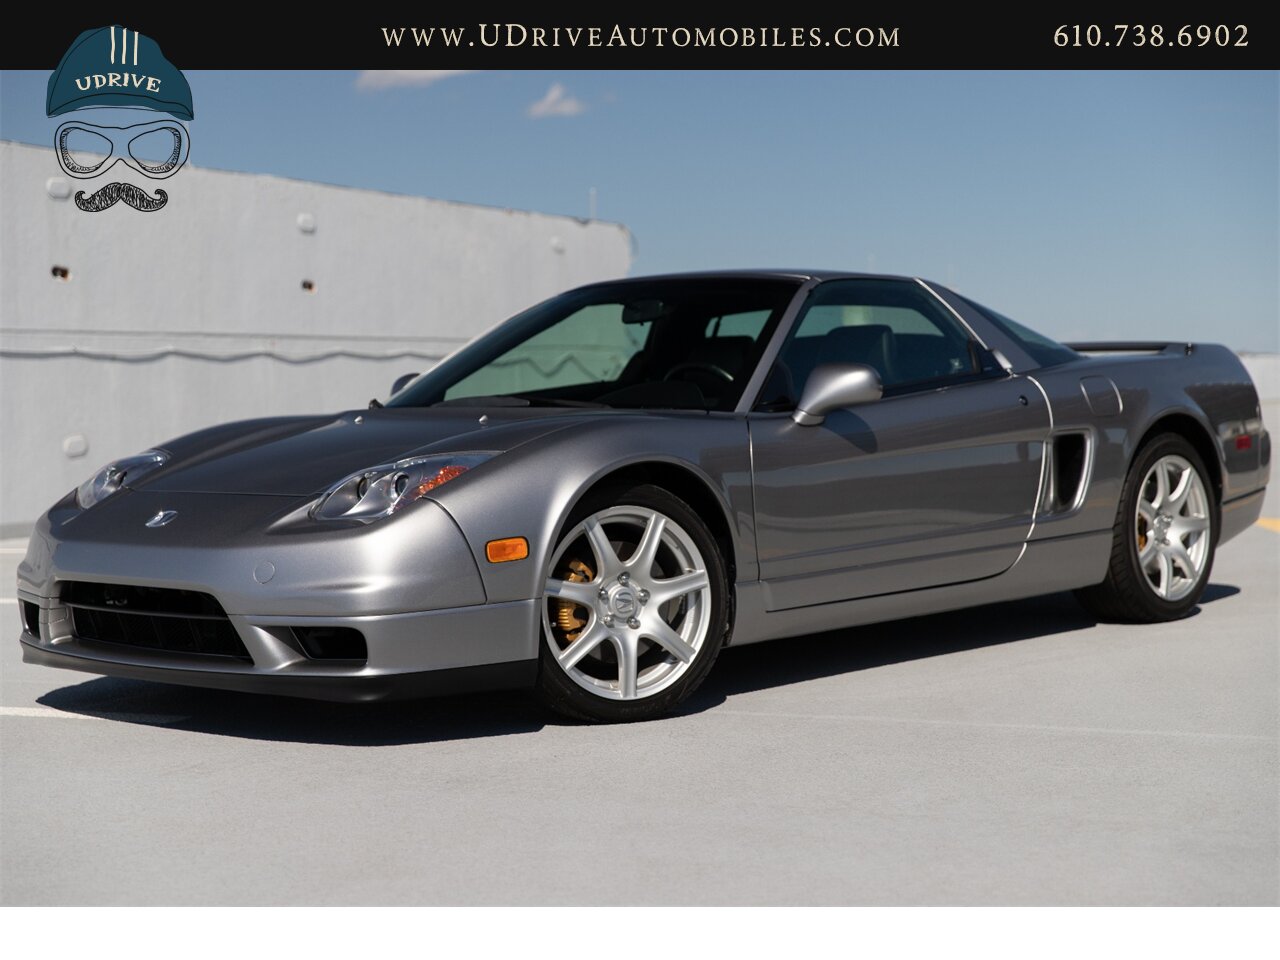 02 Acura Nsx Nsx T 9k Miles 6 Speed Manual Service History Collector Grade